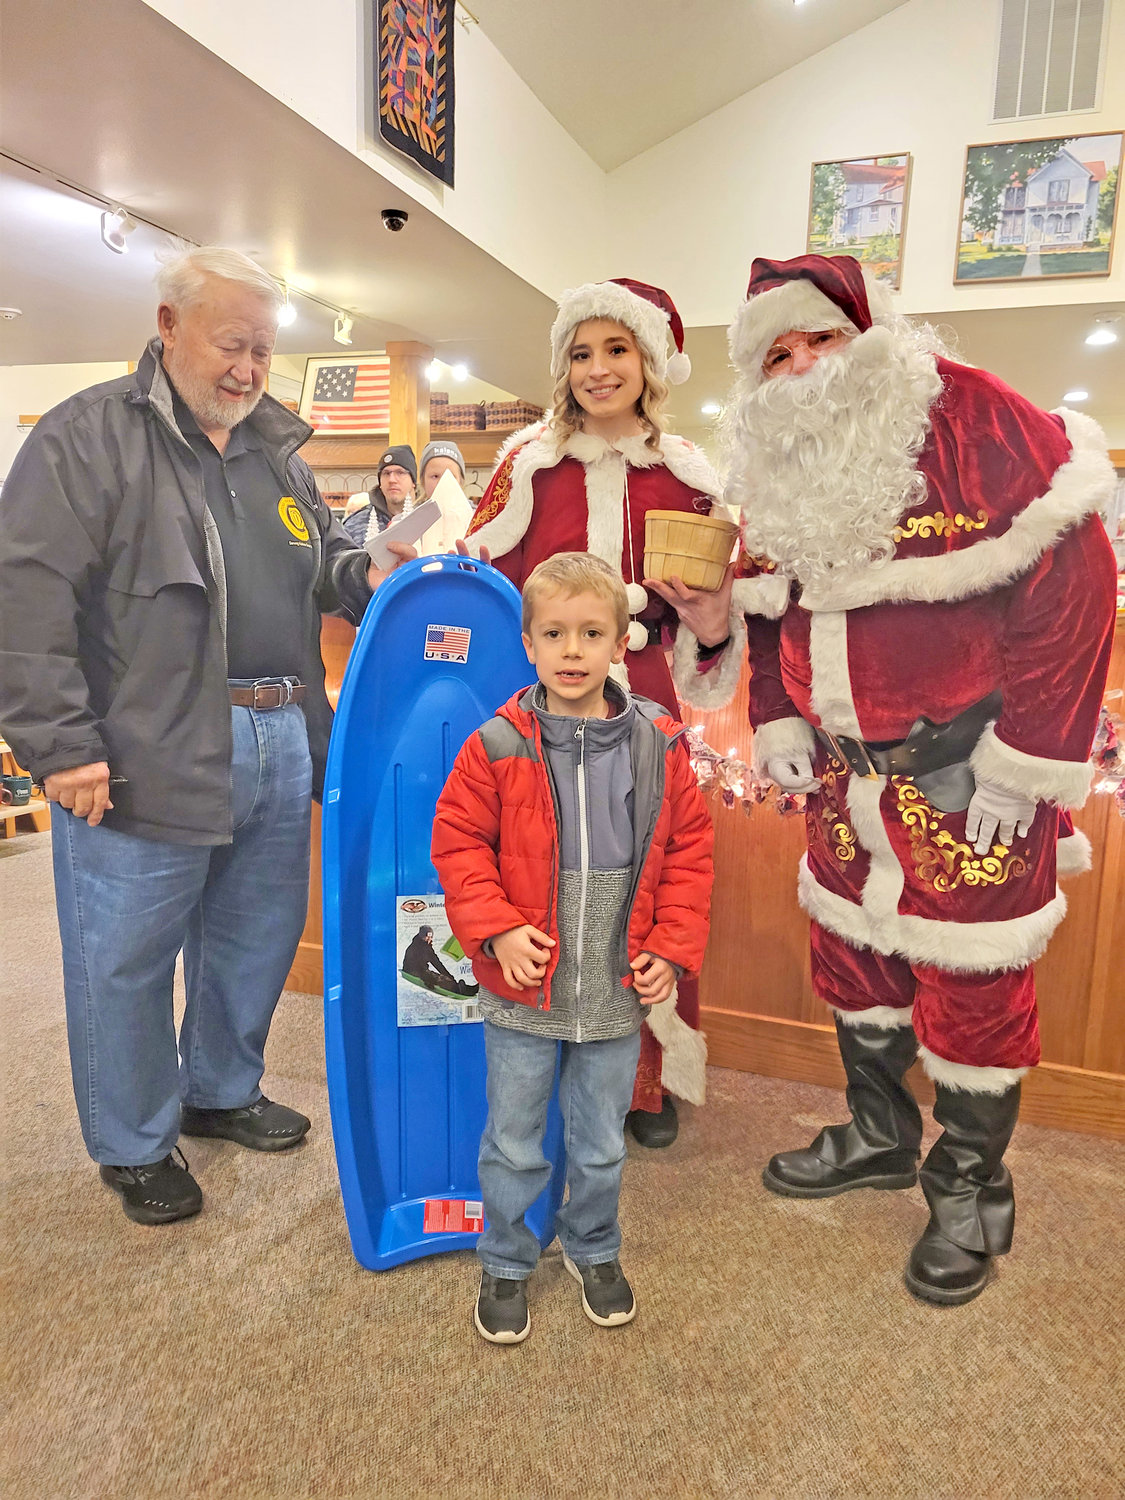 Hudon Helmuth, son of Anthony and Shaina Helmuth of Kalona, was the winner of the blue sled given away by the Kalona Optimists.